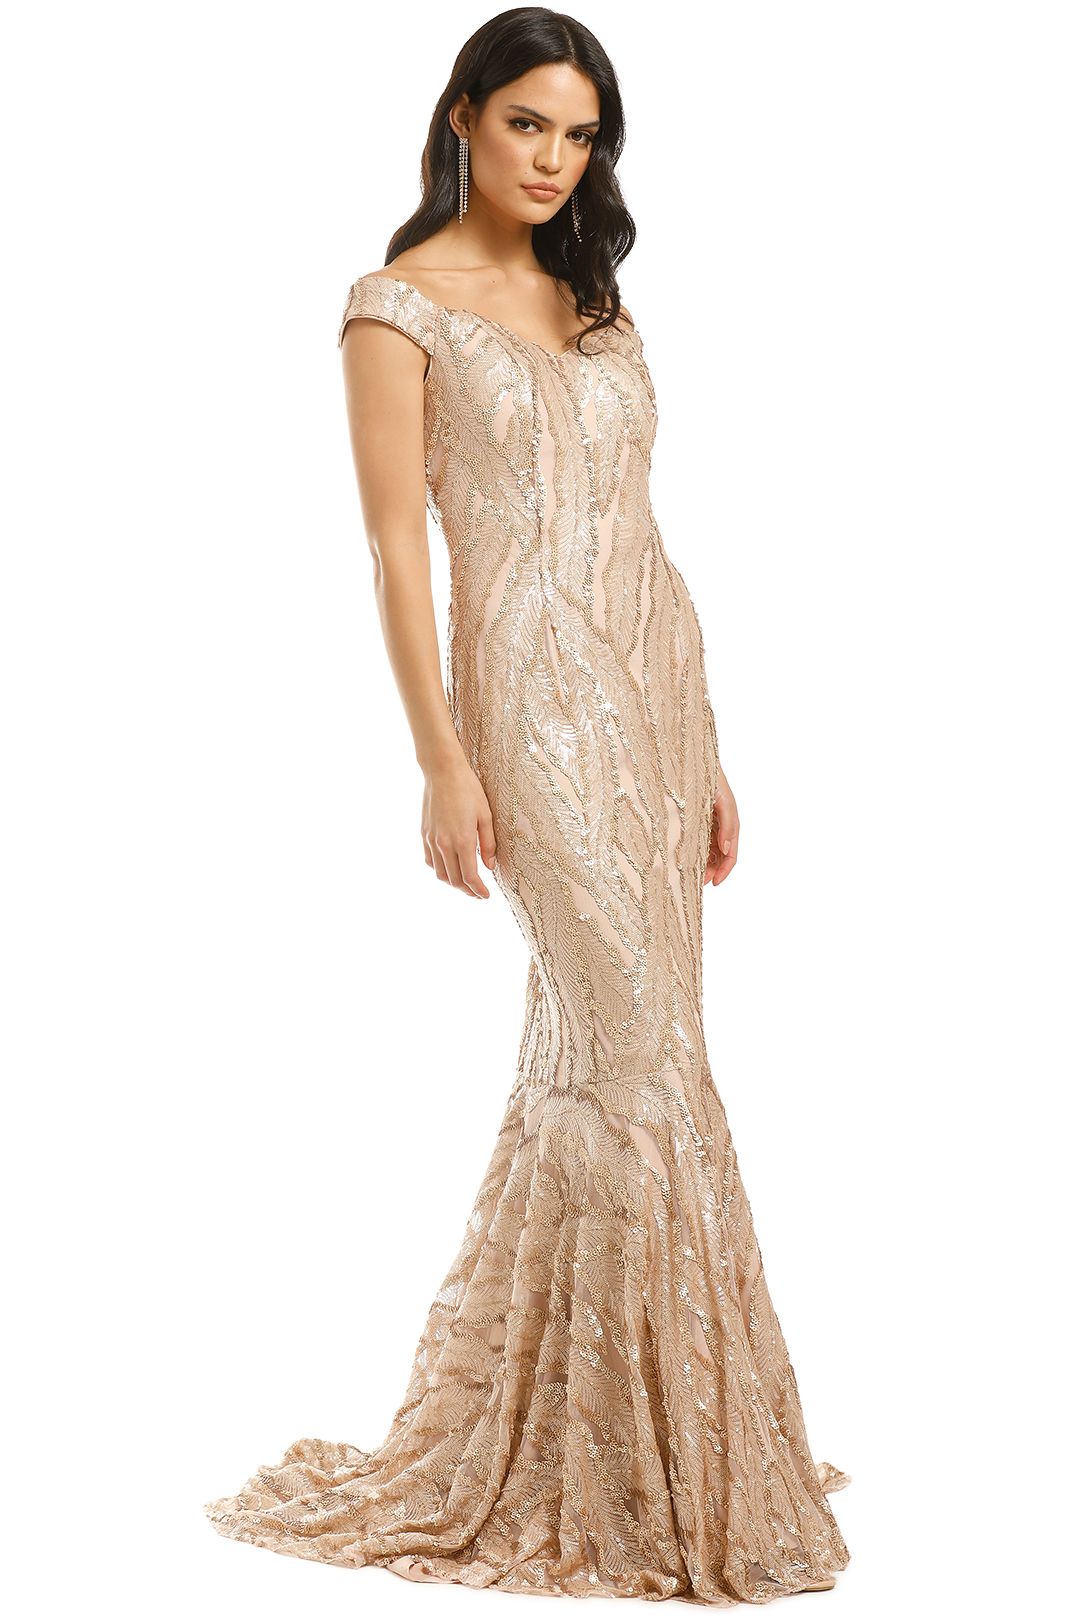 Jadore-Kayley-Gown-Champagne-Side